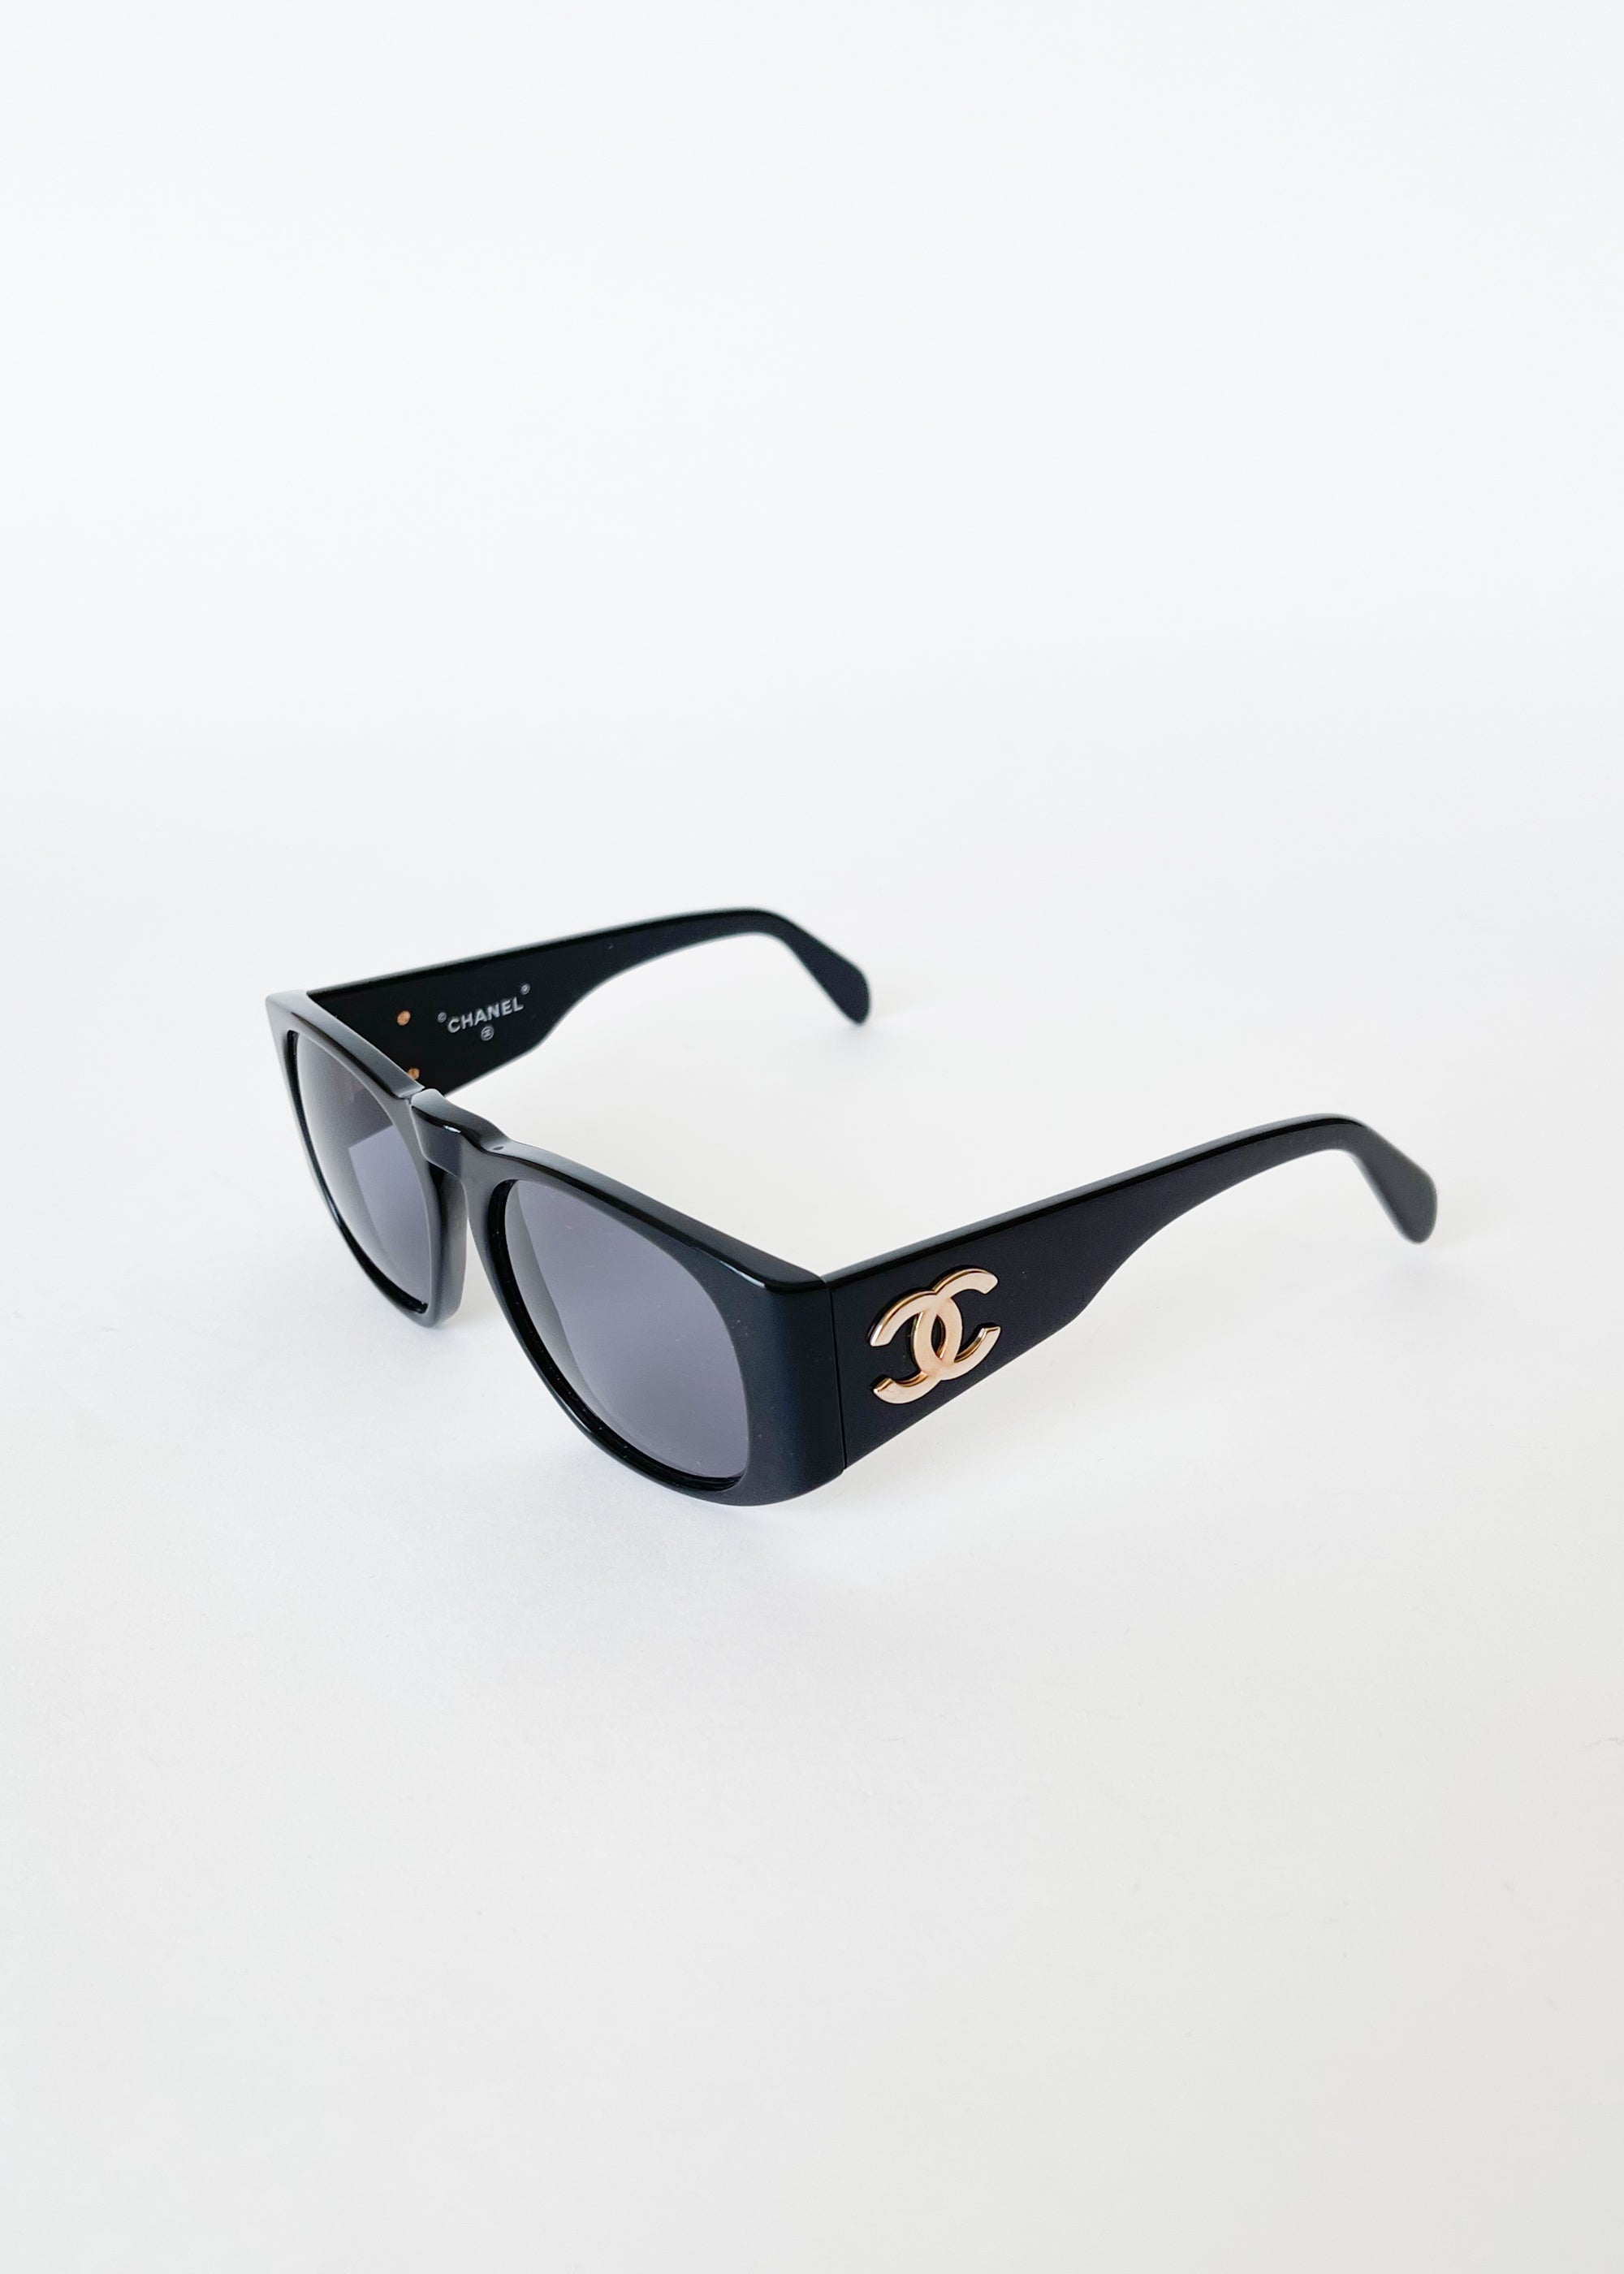 Where to buy Chanel Eyewear and who manufactures Chanel Eyewear?